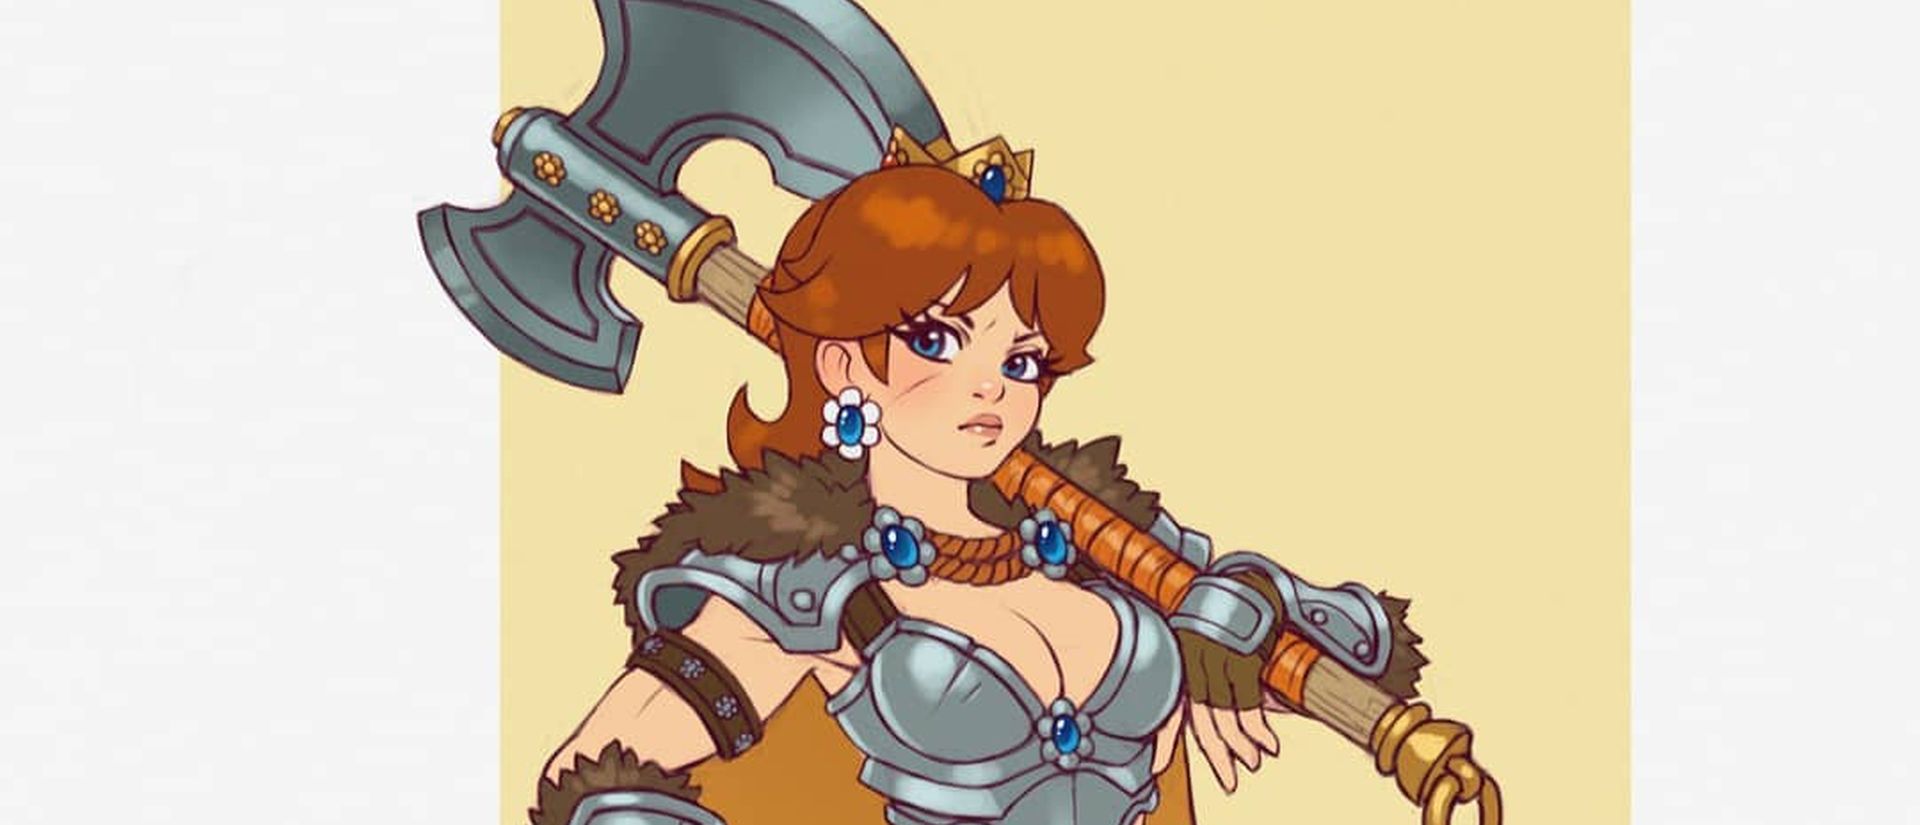 Fan Art Imagines Daisy From SUPER MARIO as a Fearsome Warrior Princess.